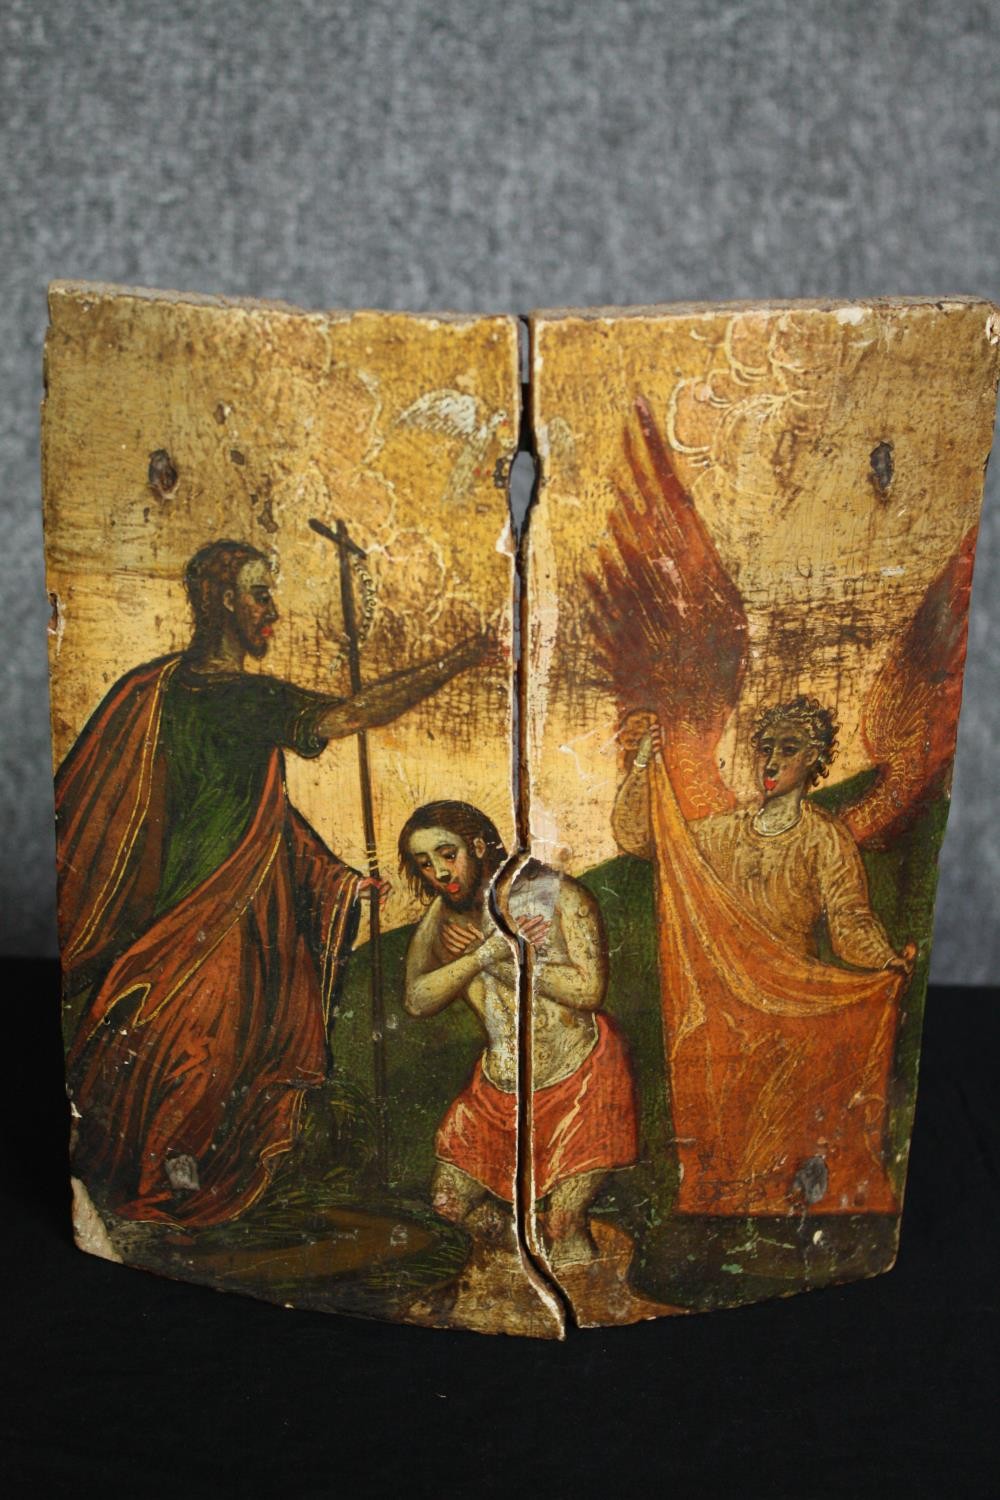 A 19th century hand painted religious icon on panel along with an eastern lacquered stationery box. - Image 2 of 8